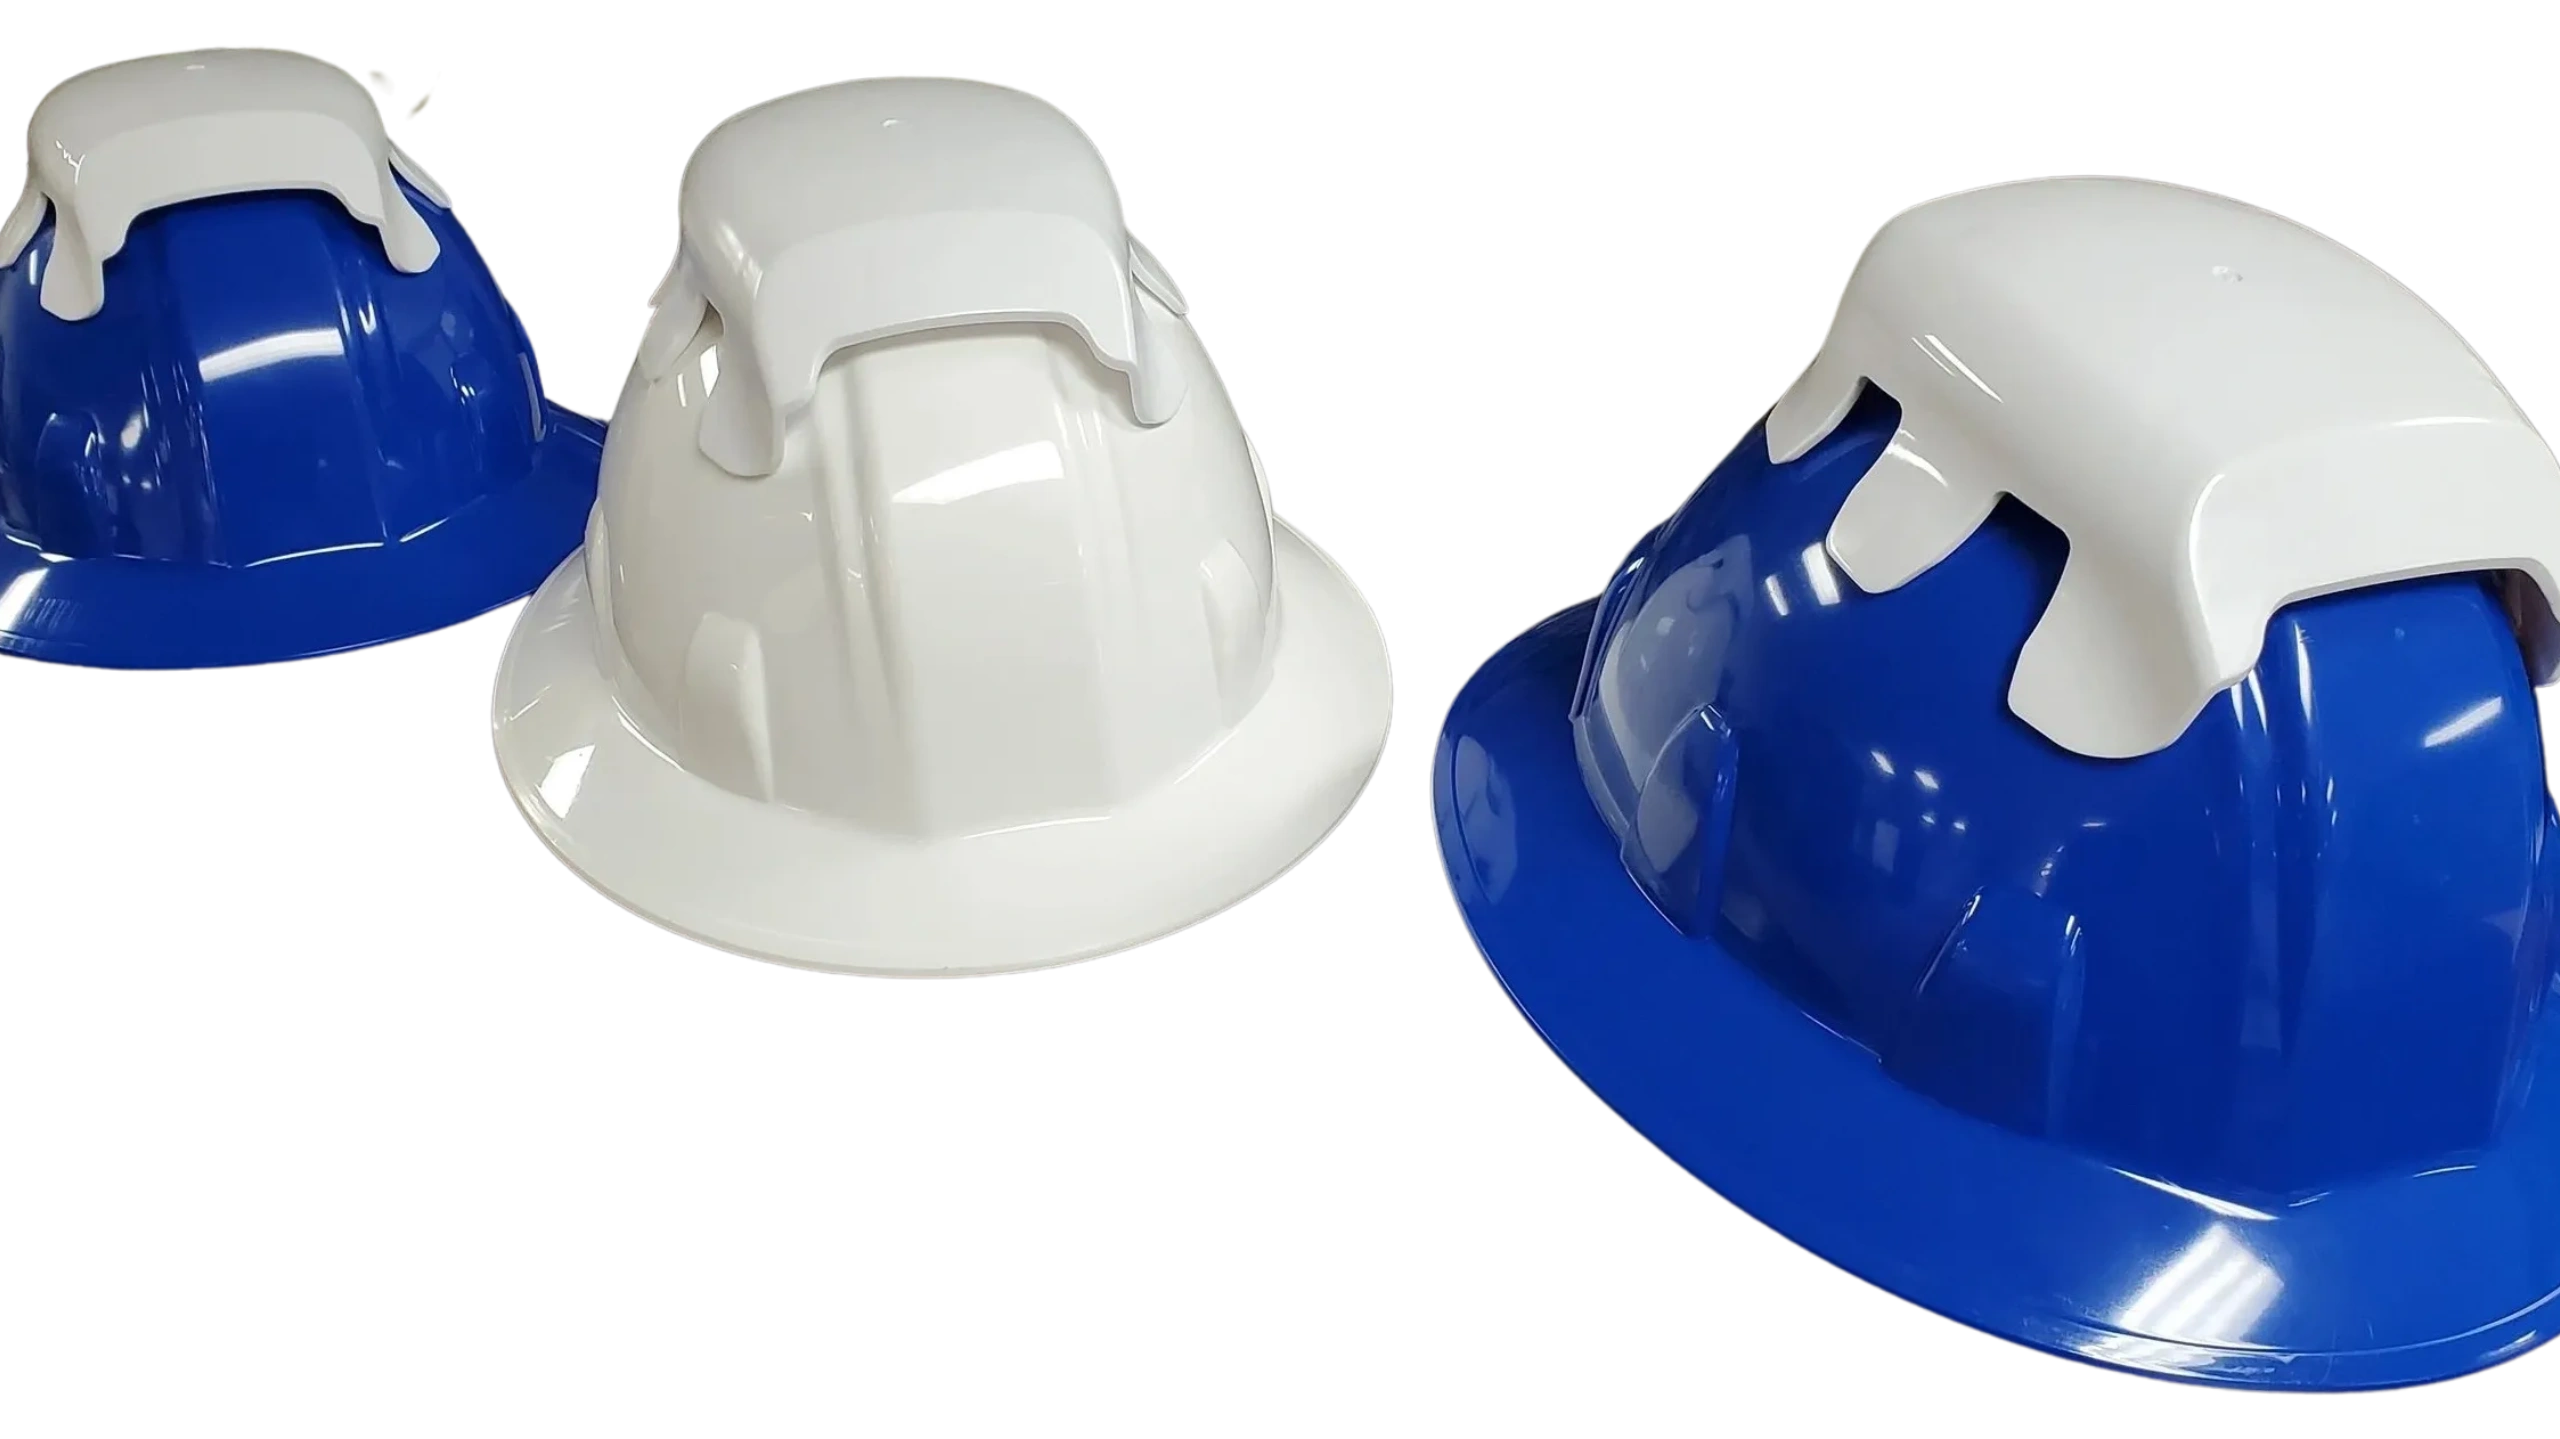 Hard Hats, Battery powdered self-cooling hard hat. Cooler Heads online, Max Chill Hard hats